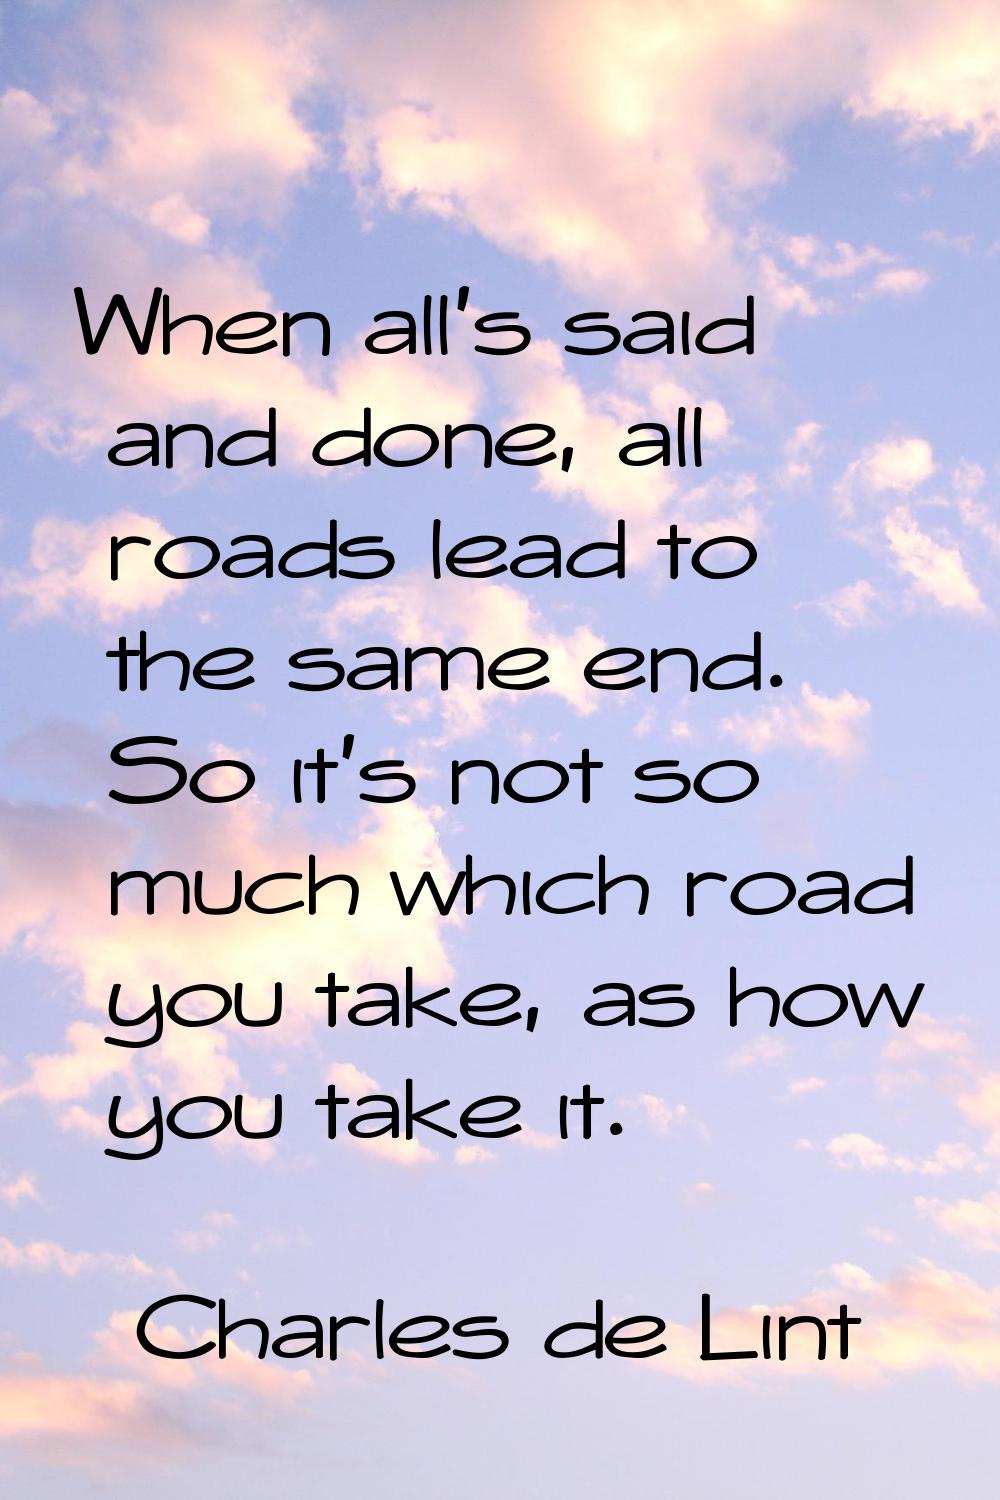 When all's said and done, all roads lead to the same end. So it's not so much which road you take, 